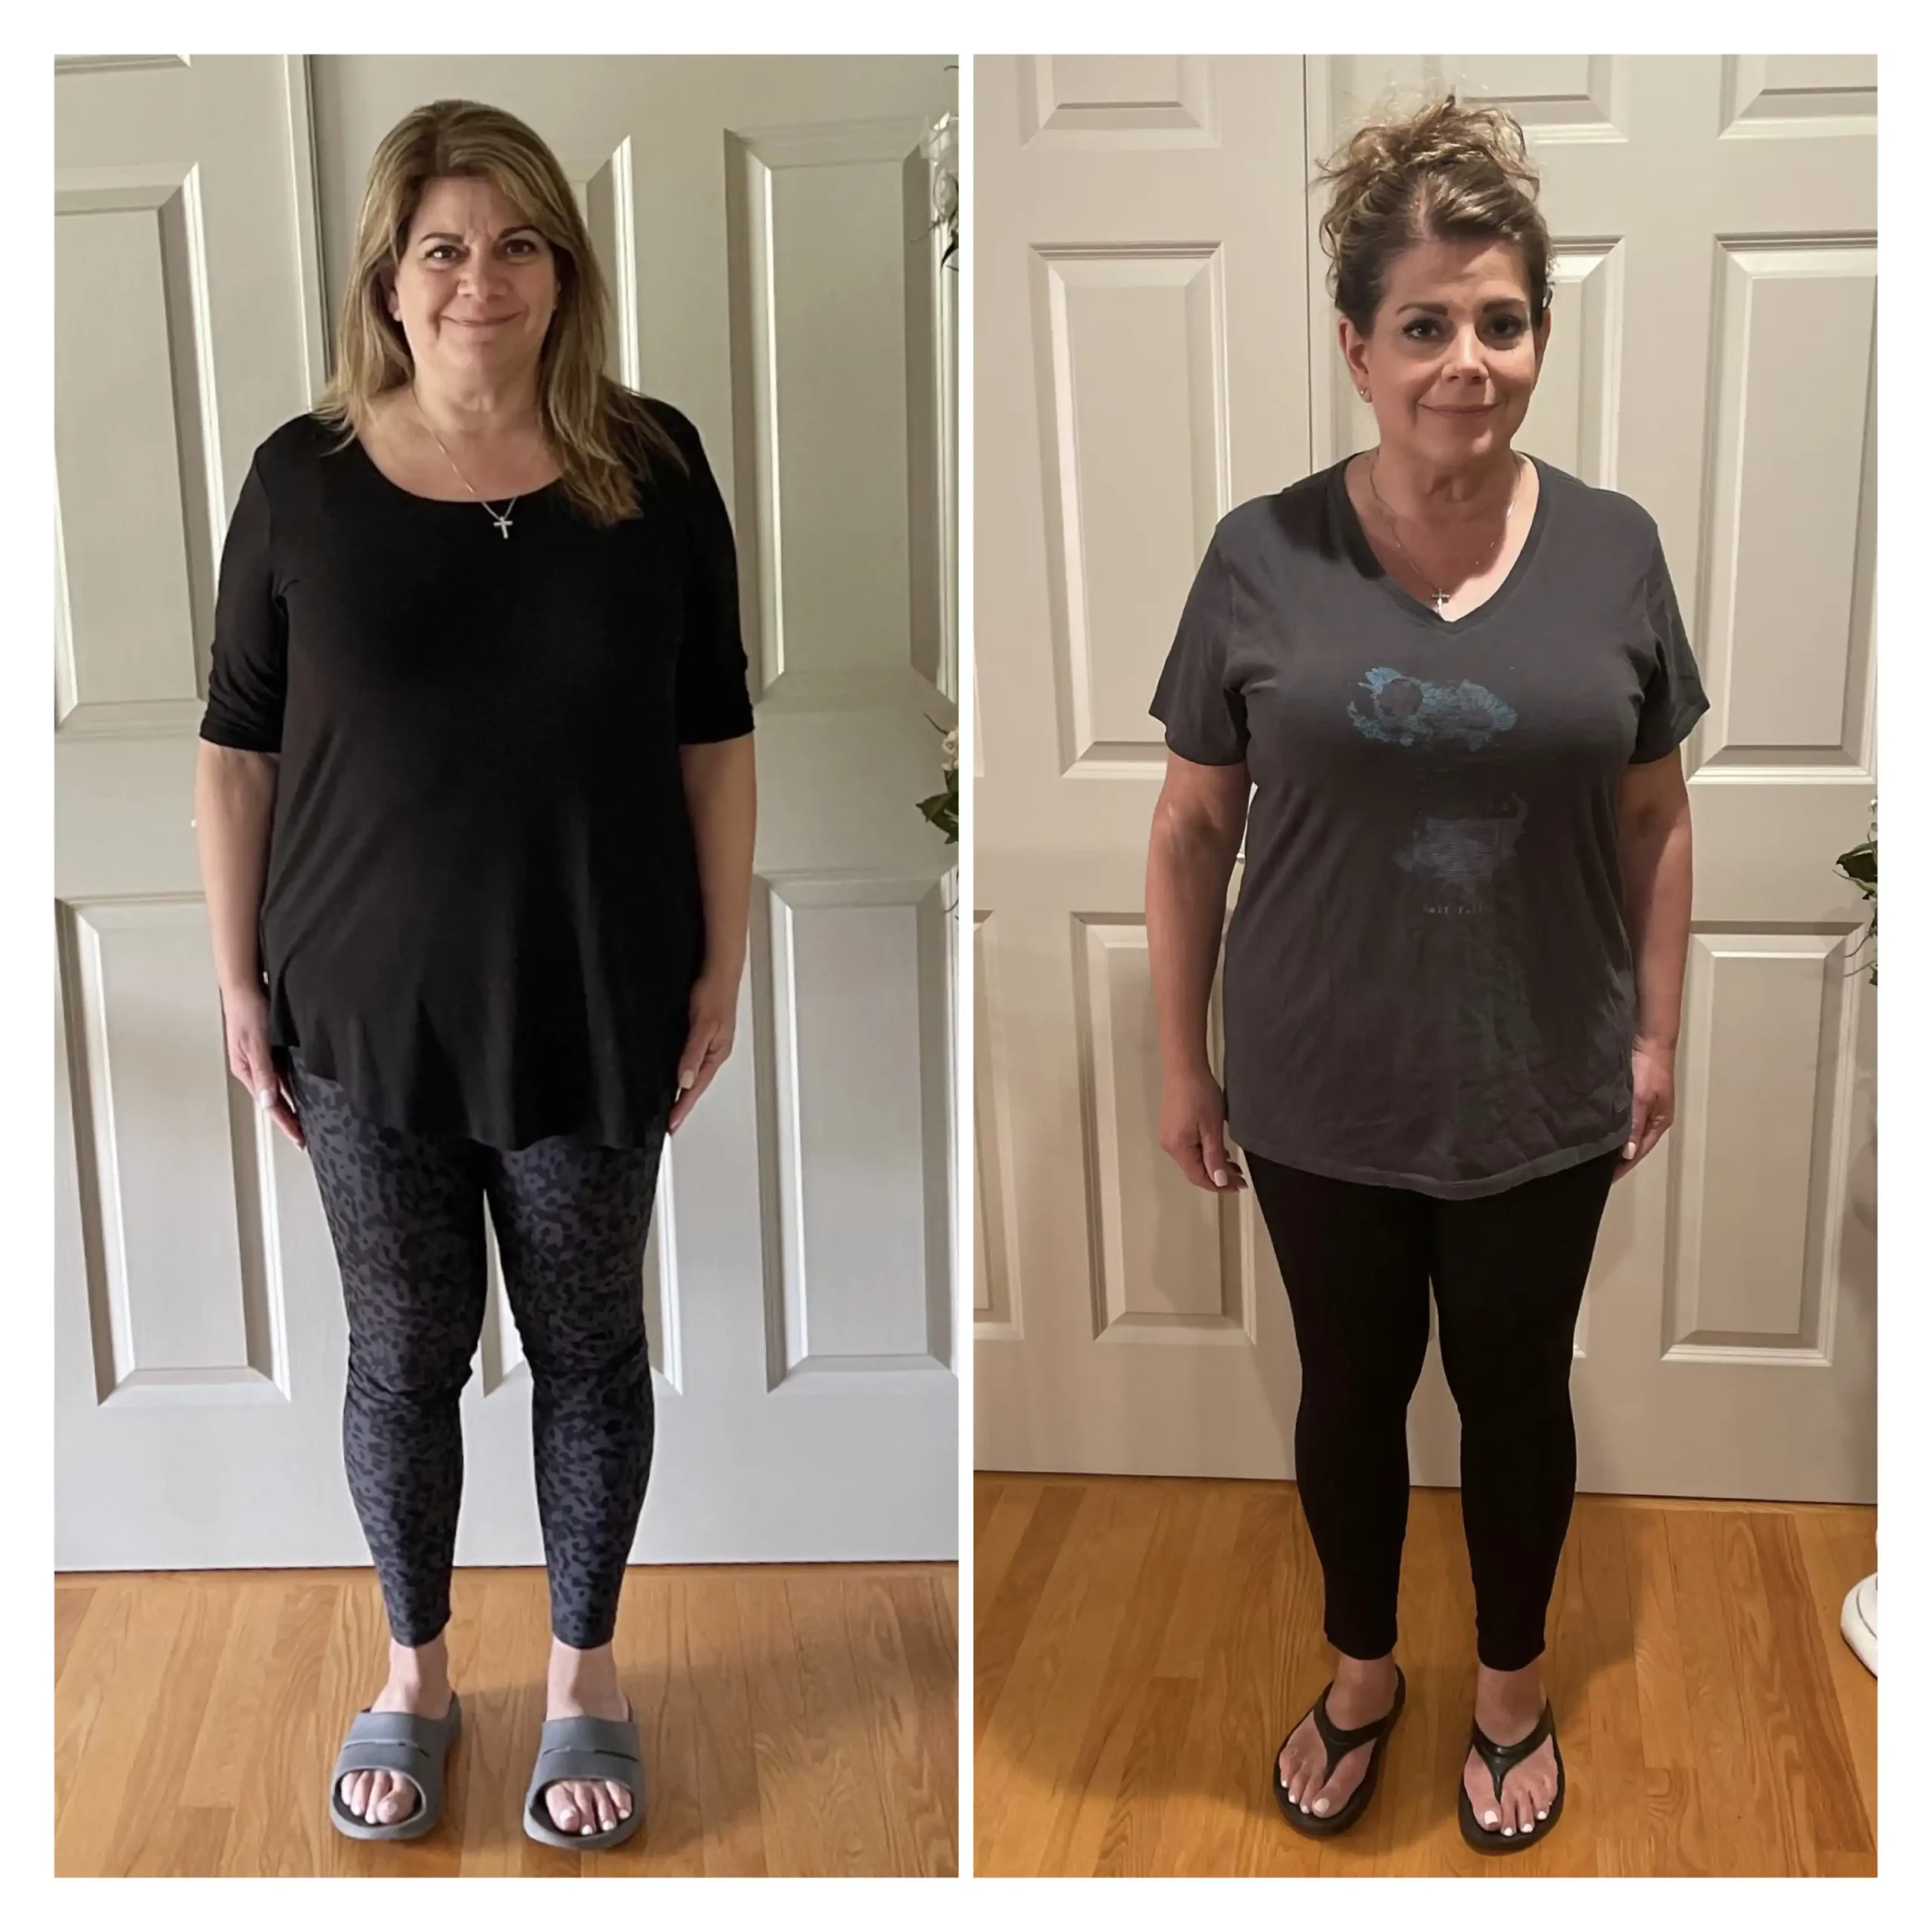 Martine before and after weight loss